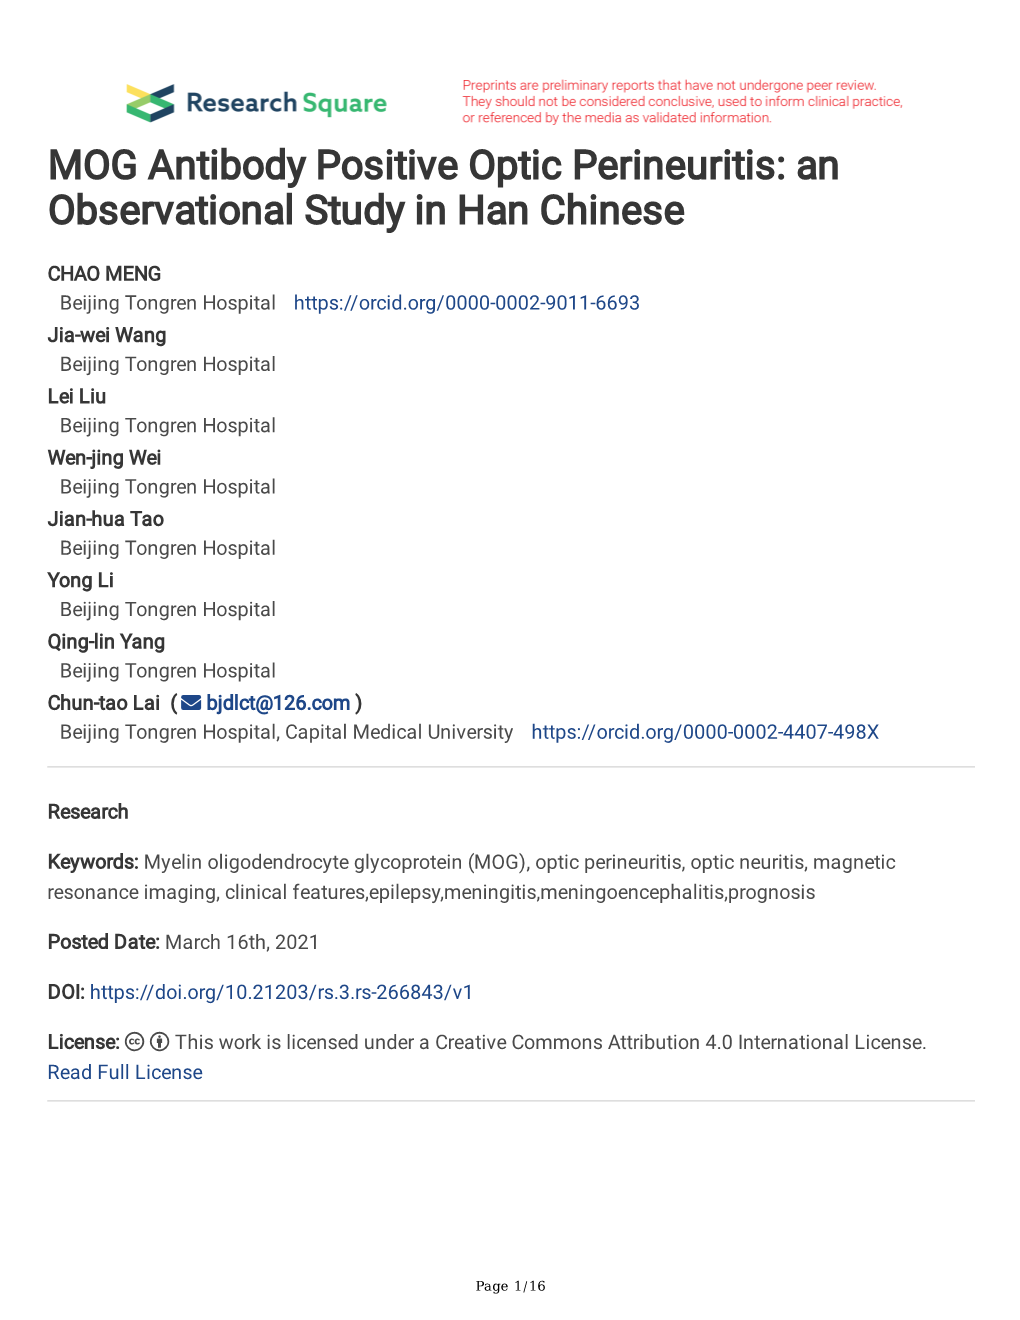 MOG Antibody Positive Optic Perineuritis: an Observational Study in Han Chinese